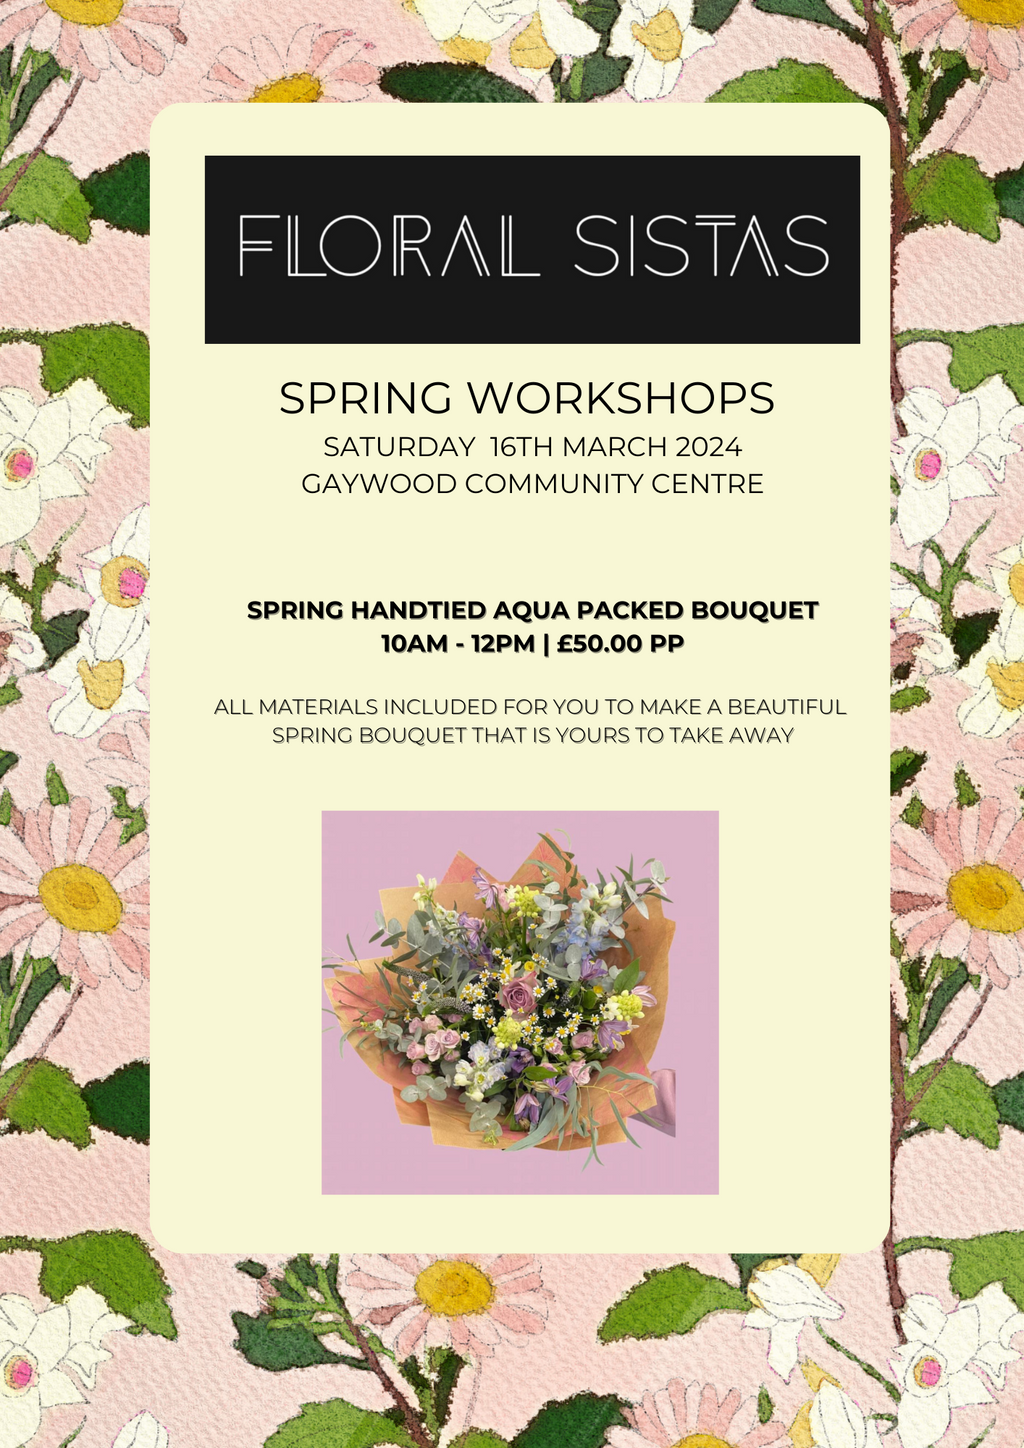 Sat 16th March 10am- Spring Hand Tied Workshop